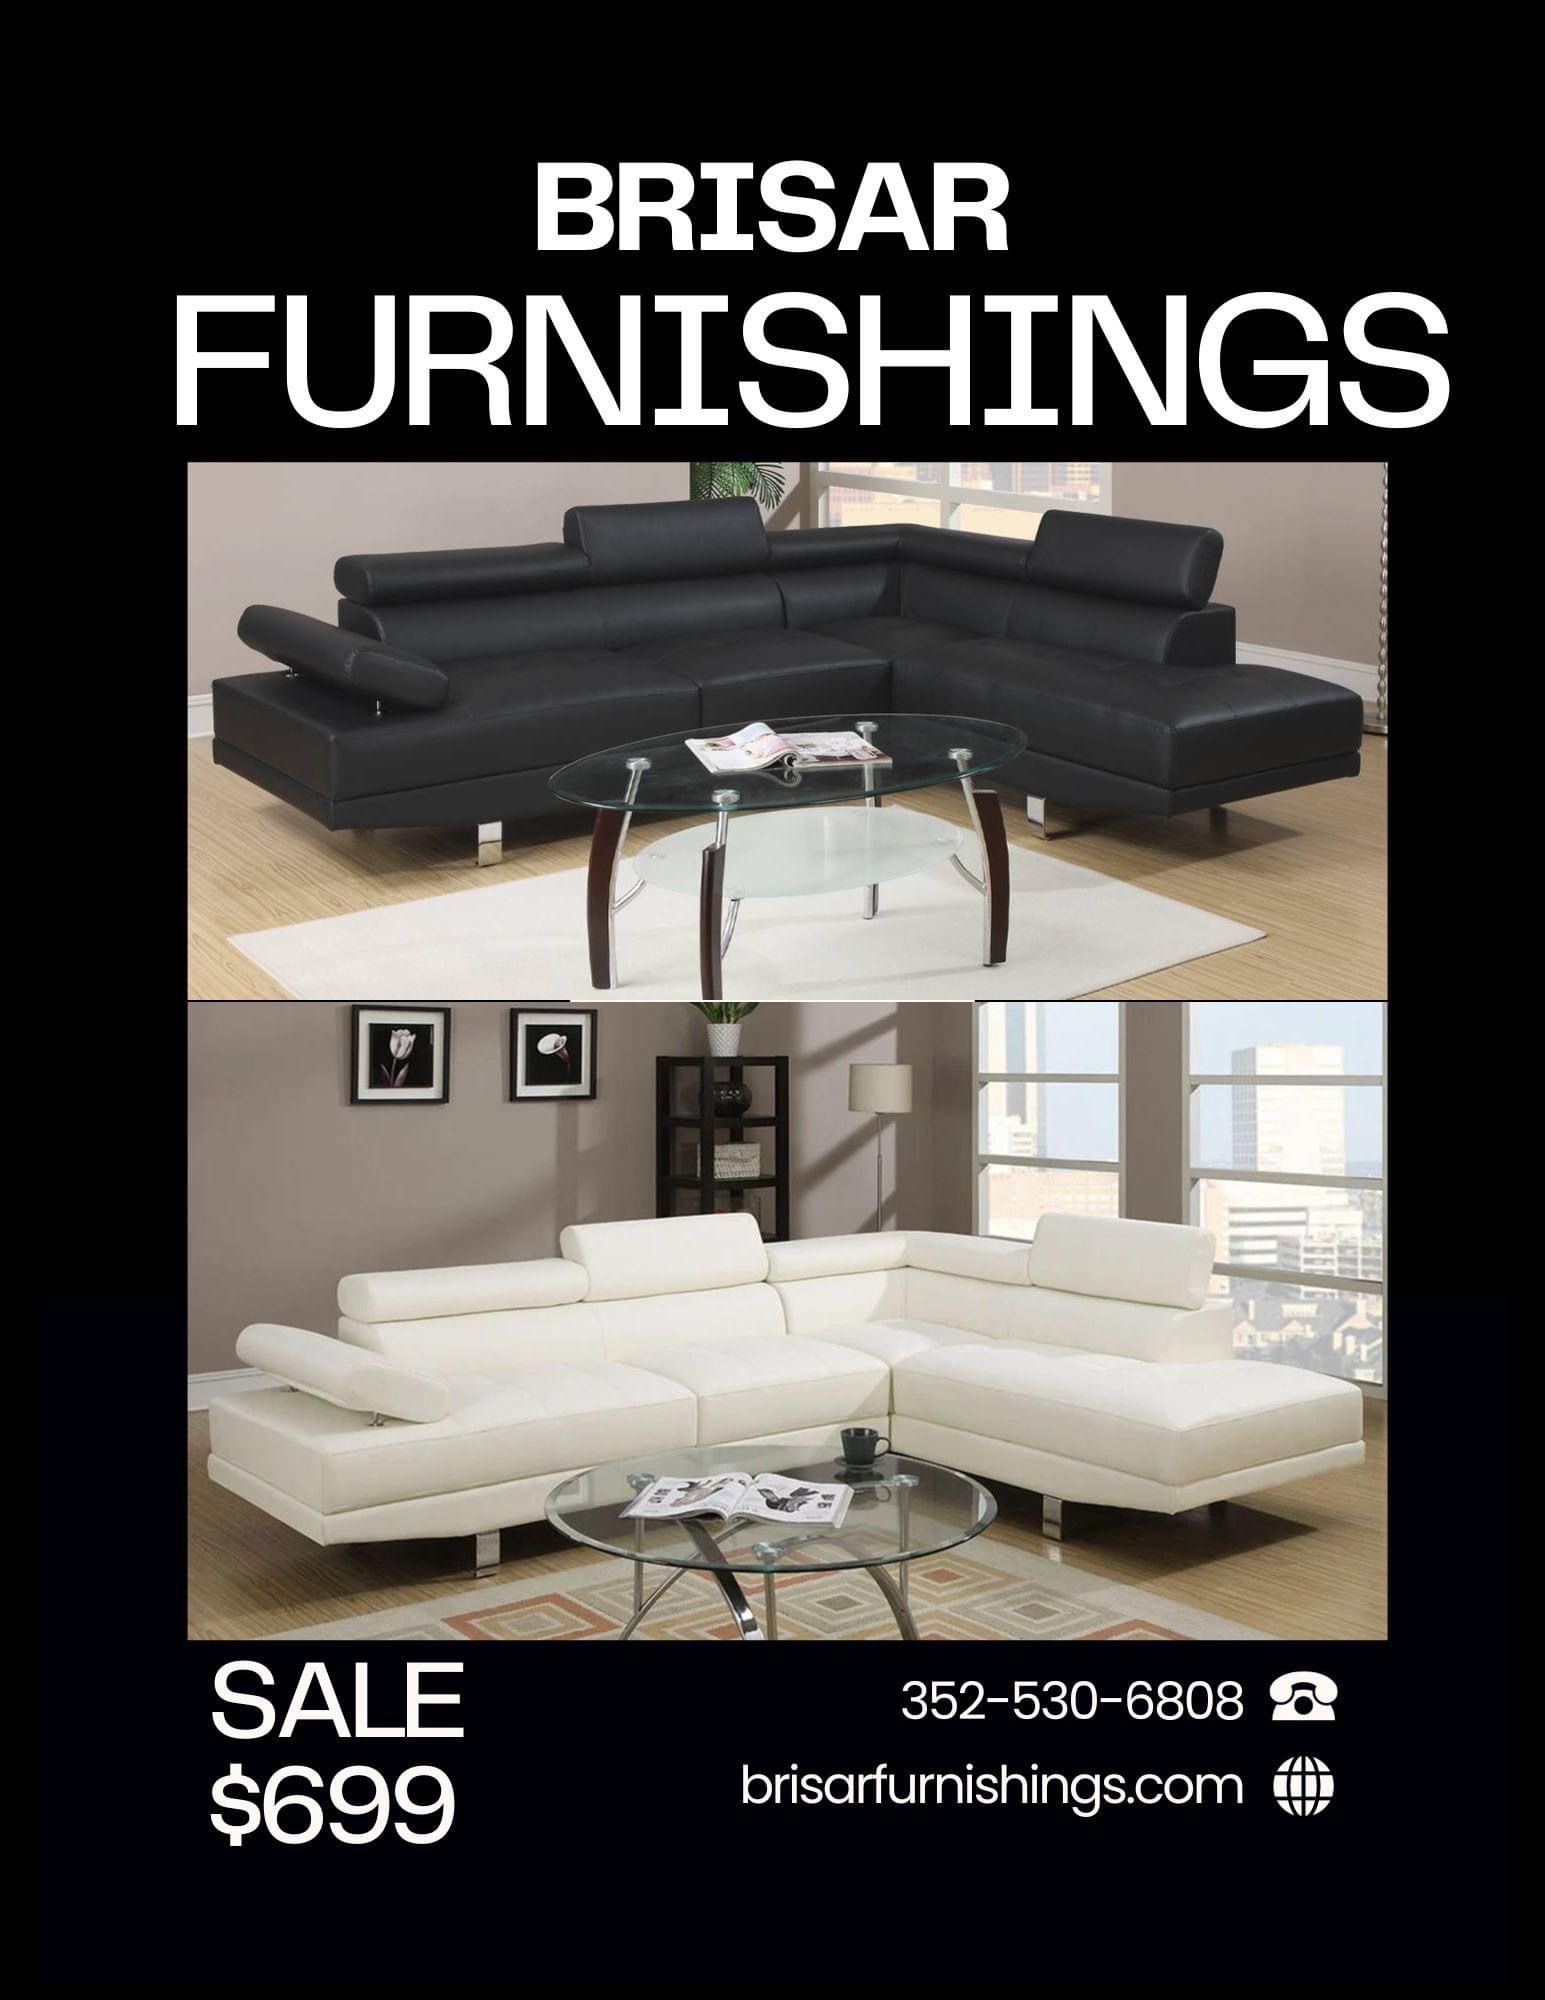 Two-Piece L-Shaped Brother Sectional With Adjustable Headrest Available In Black Or White $699